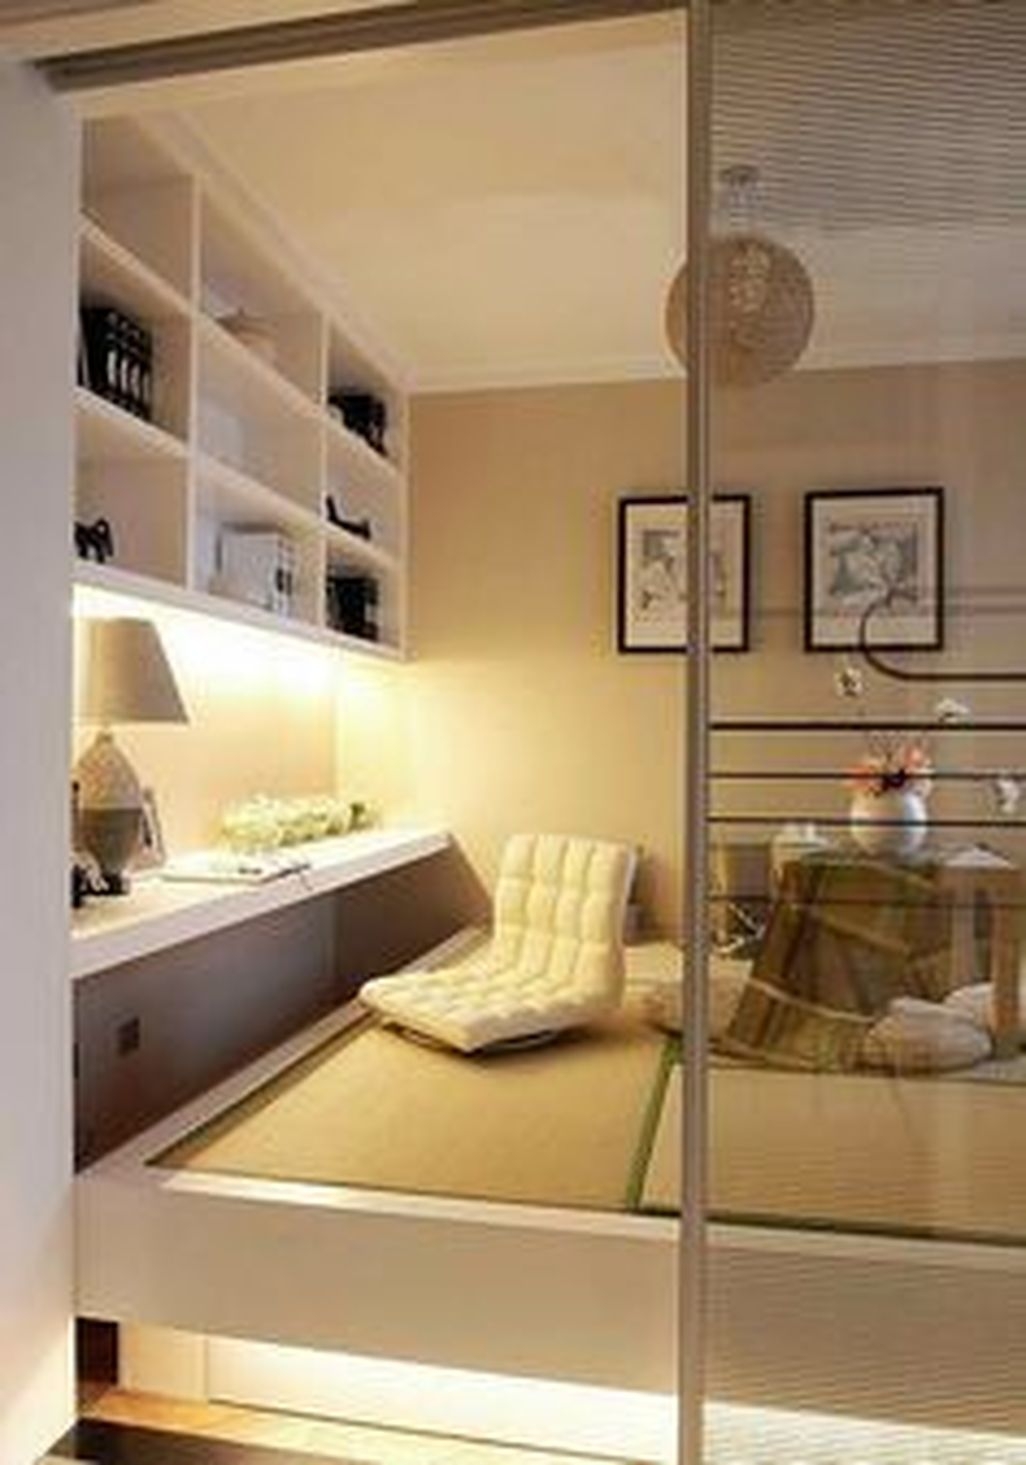 Modern But Simple Japanese Styled Bedroom Design Ideas 15 – ZYHOMY